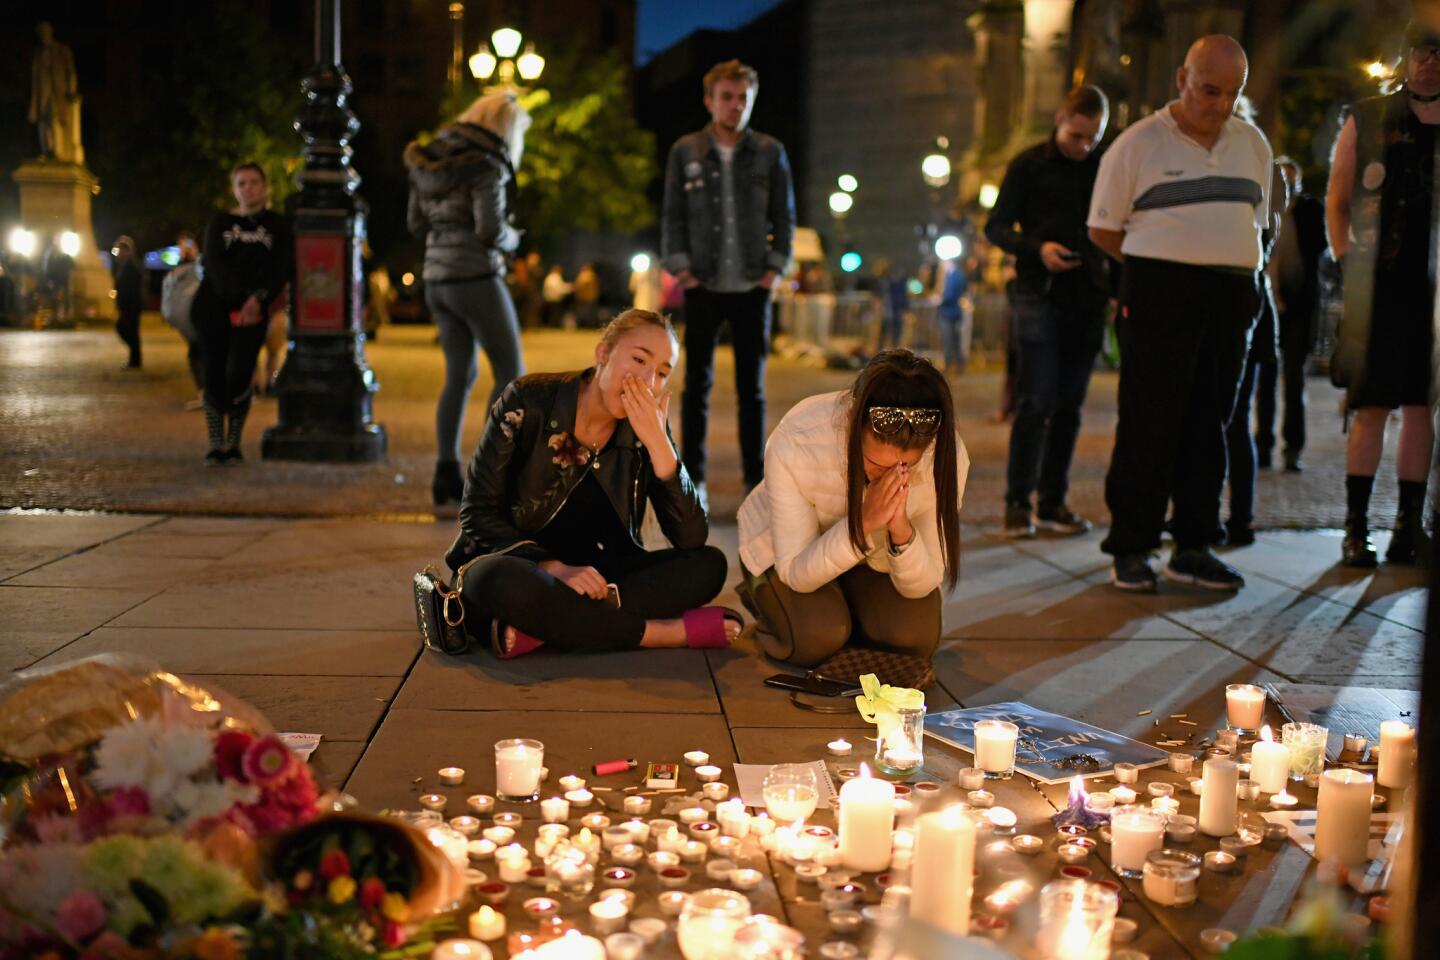 Mourners attend a candlelight vigil on May 23, 2017, to honor the victims of the terrorist attack a day earlier at Manchester Arena in England.